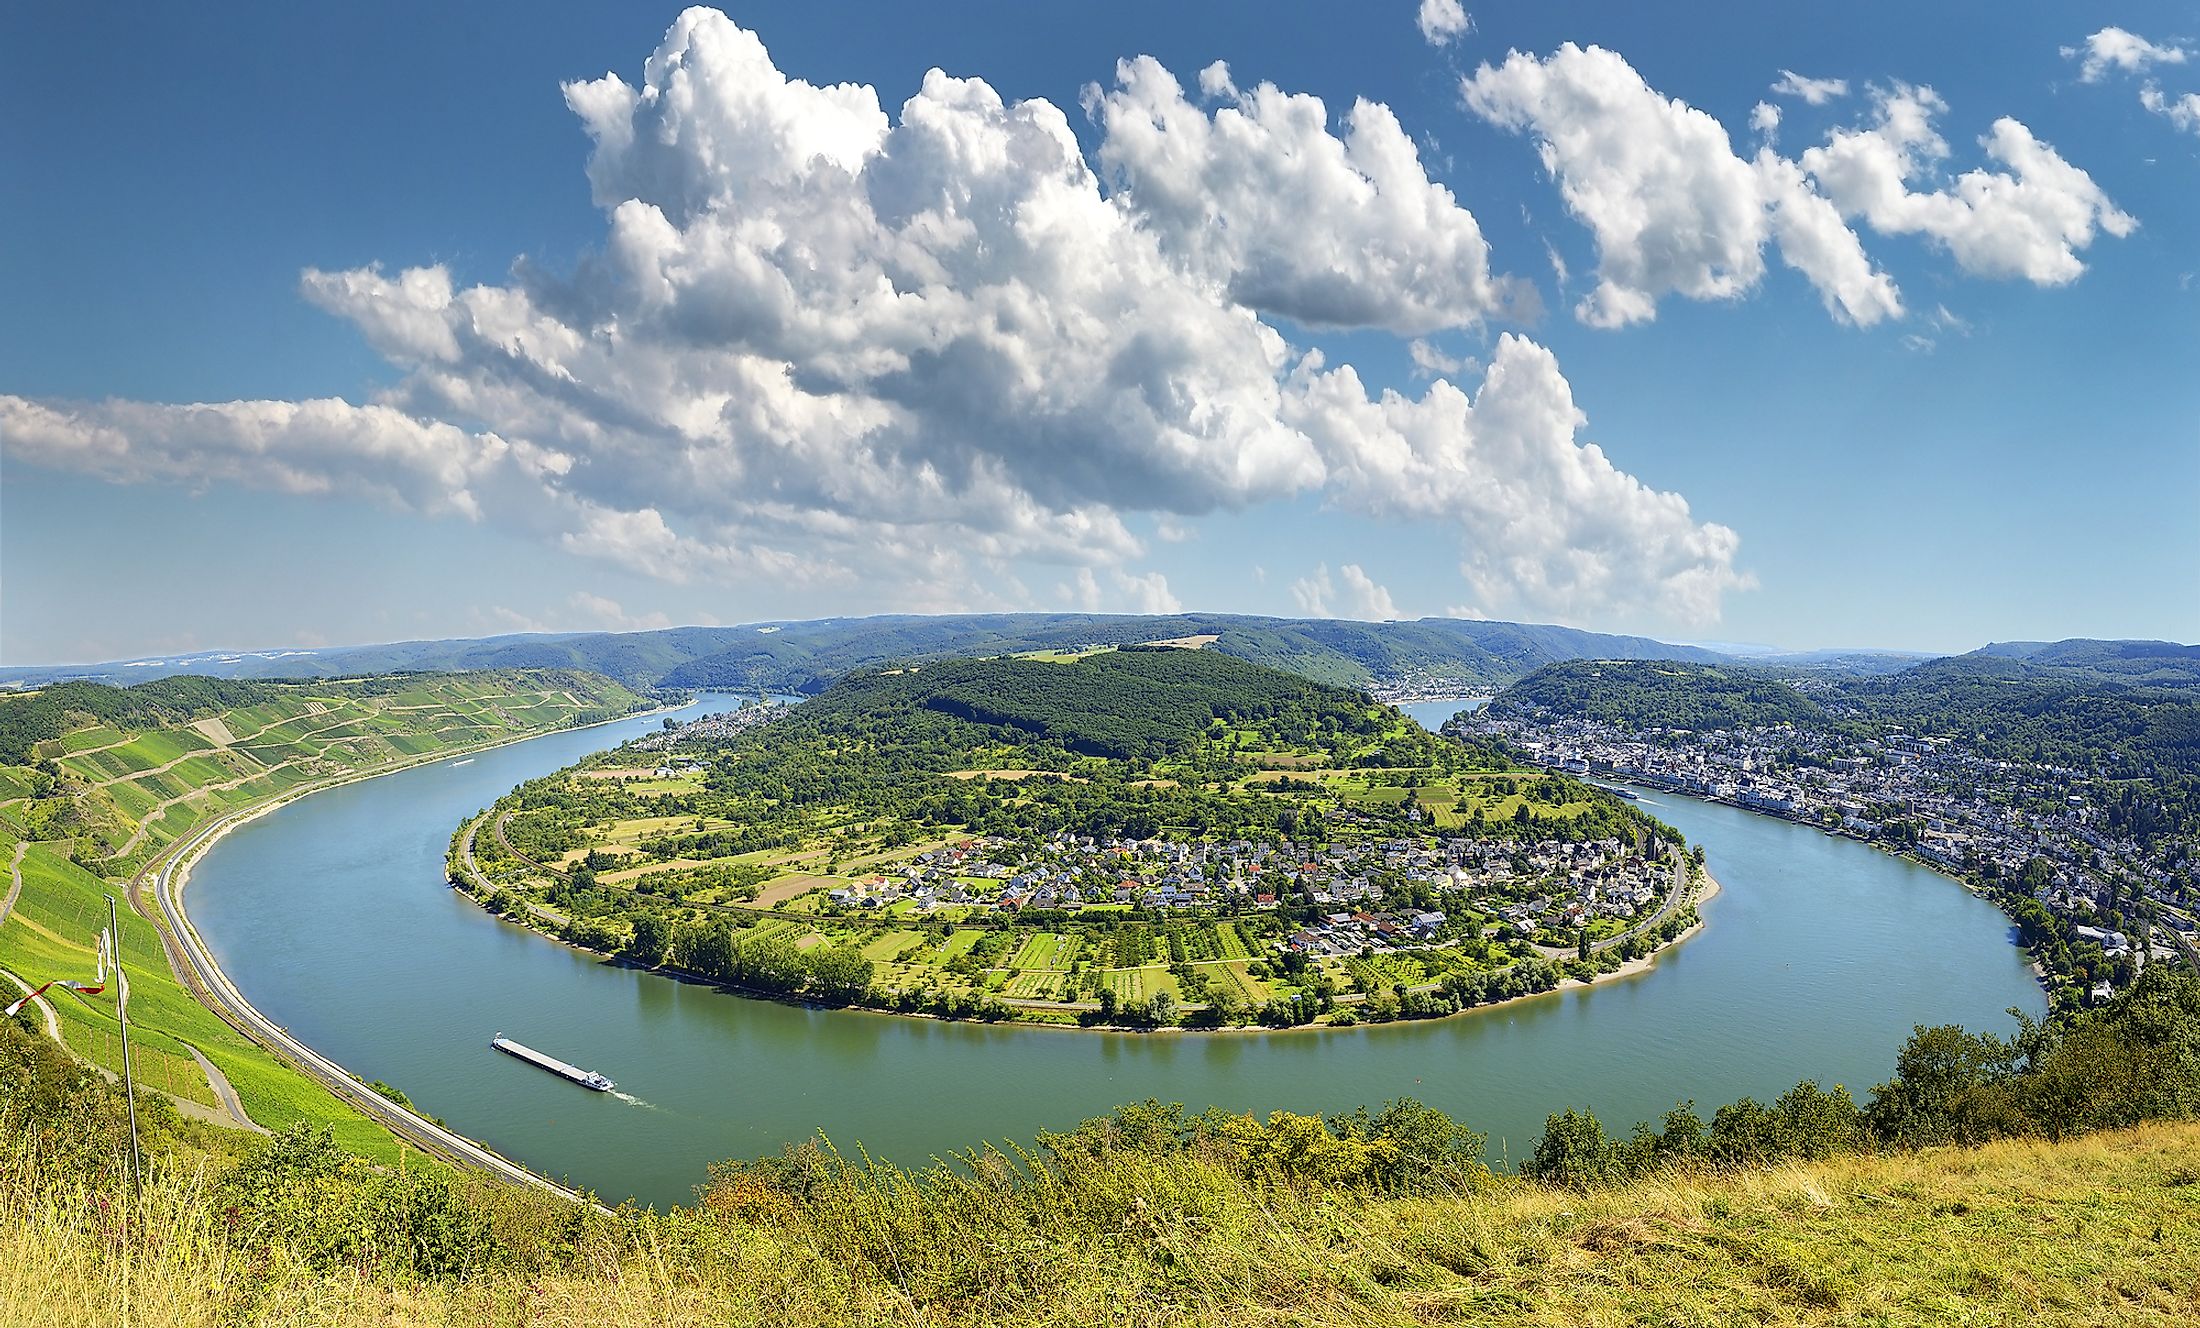 A picturesque bend in the Rhine River.